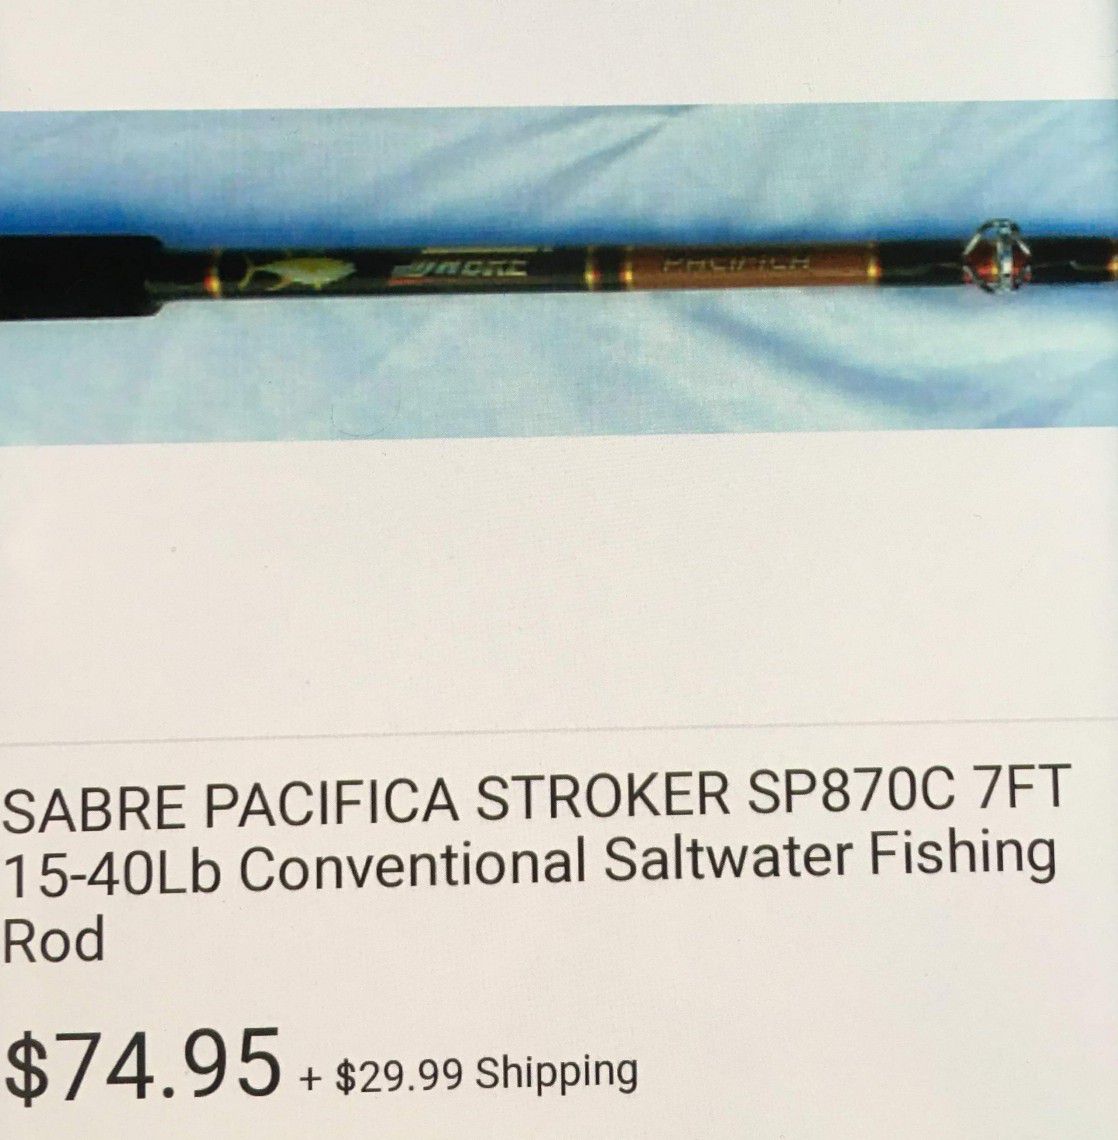 Sabre Pacifica Stroker SP870C 7FT for Sale in Camarillo, CA - OfferUp